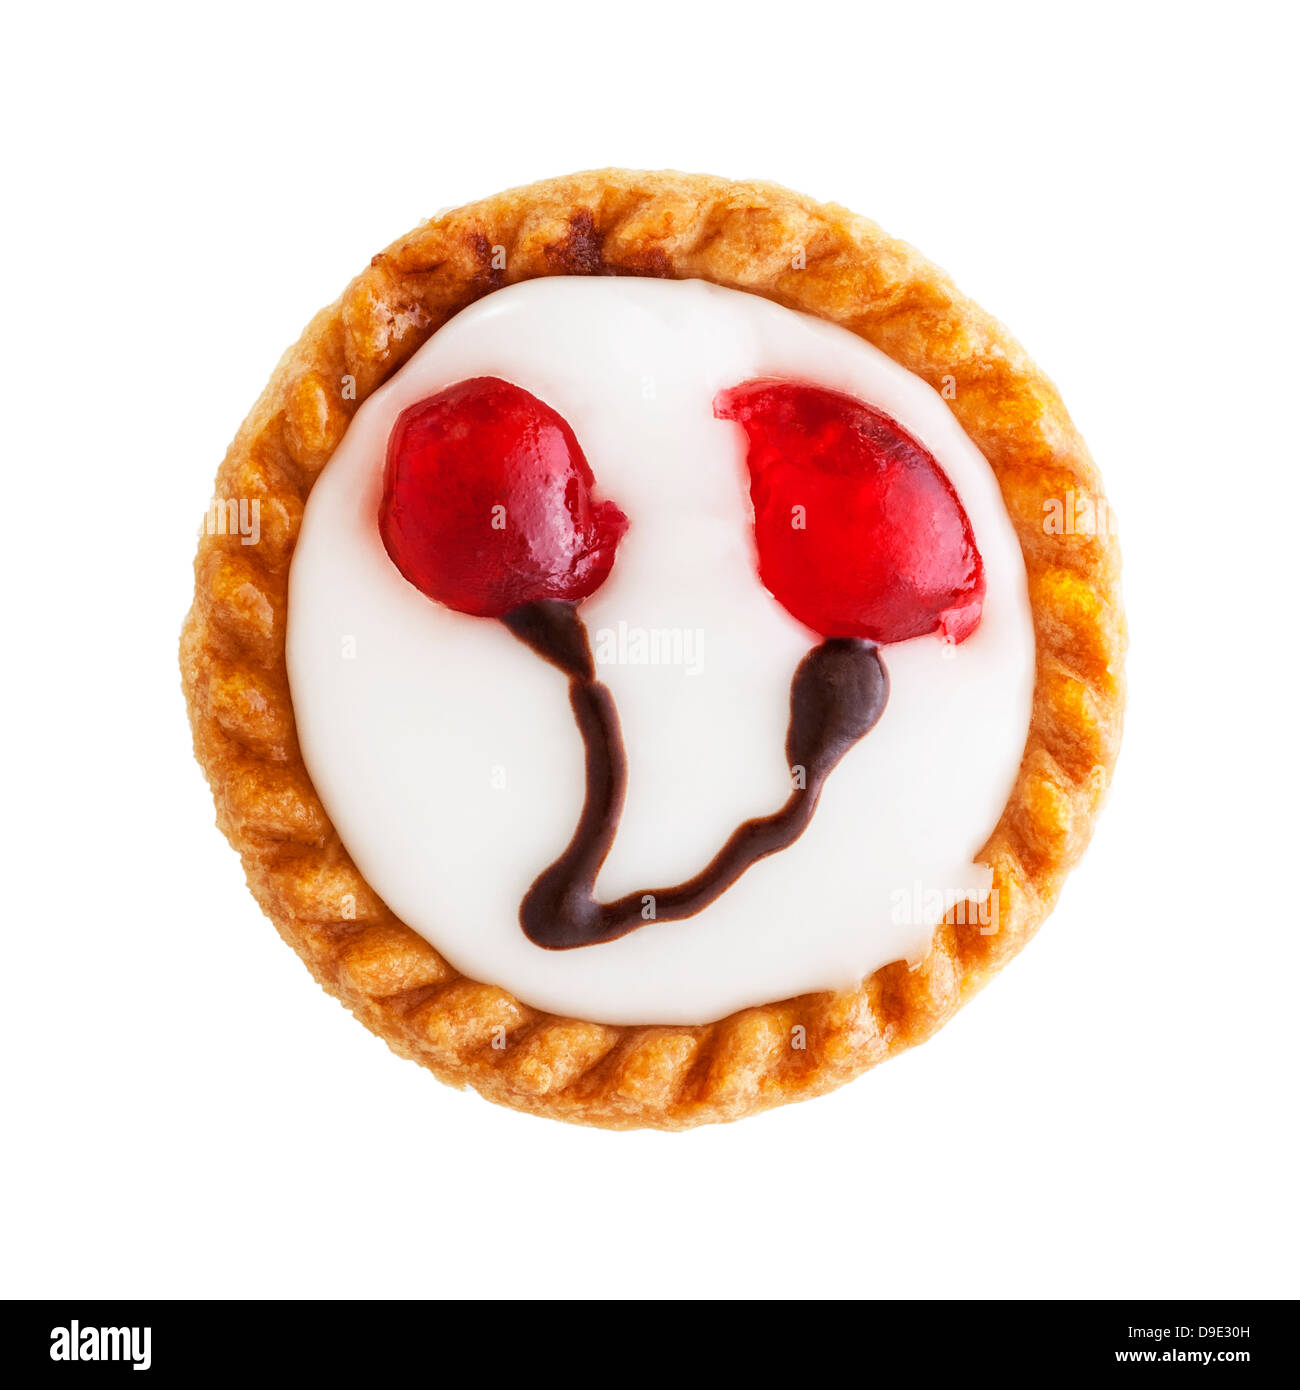 A home made Cherry Bakewell Tart on a white background Stock Photo